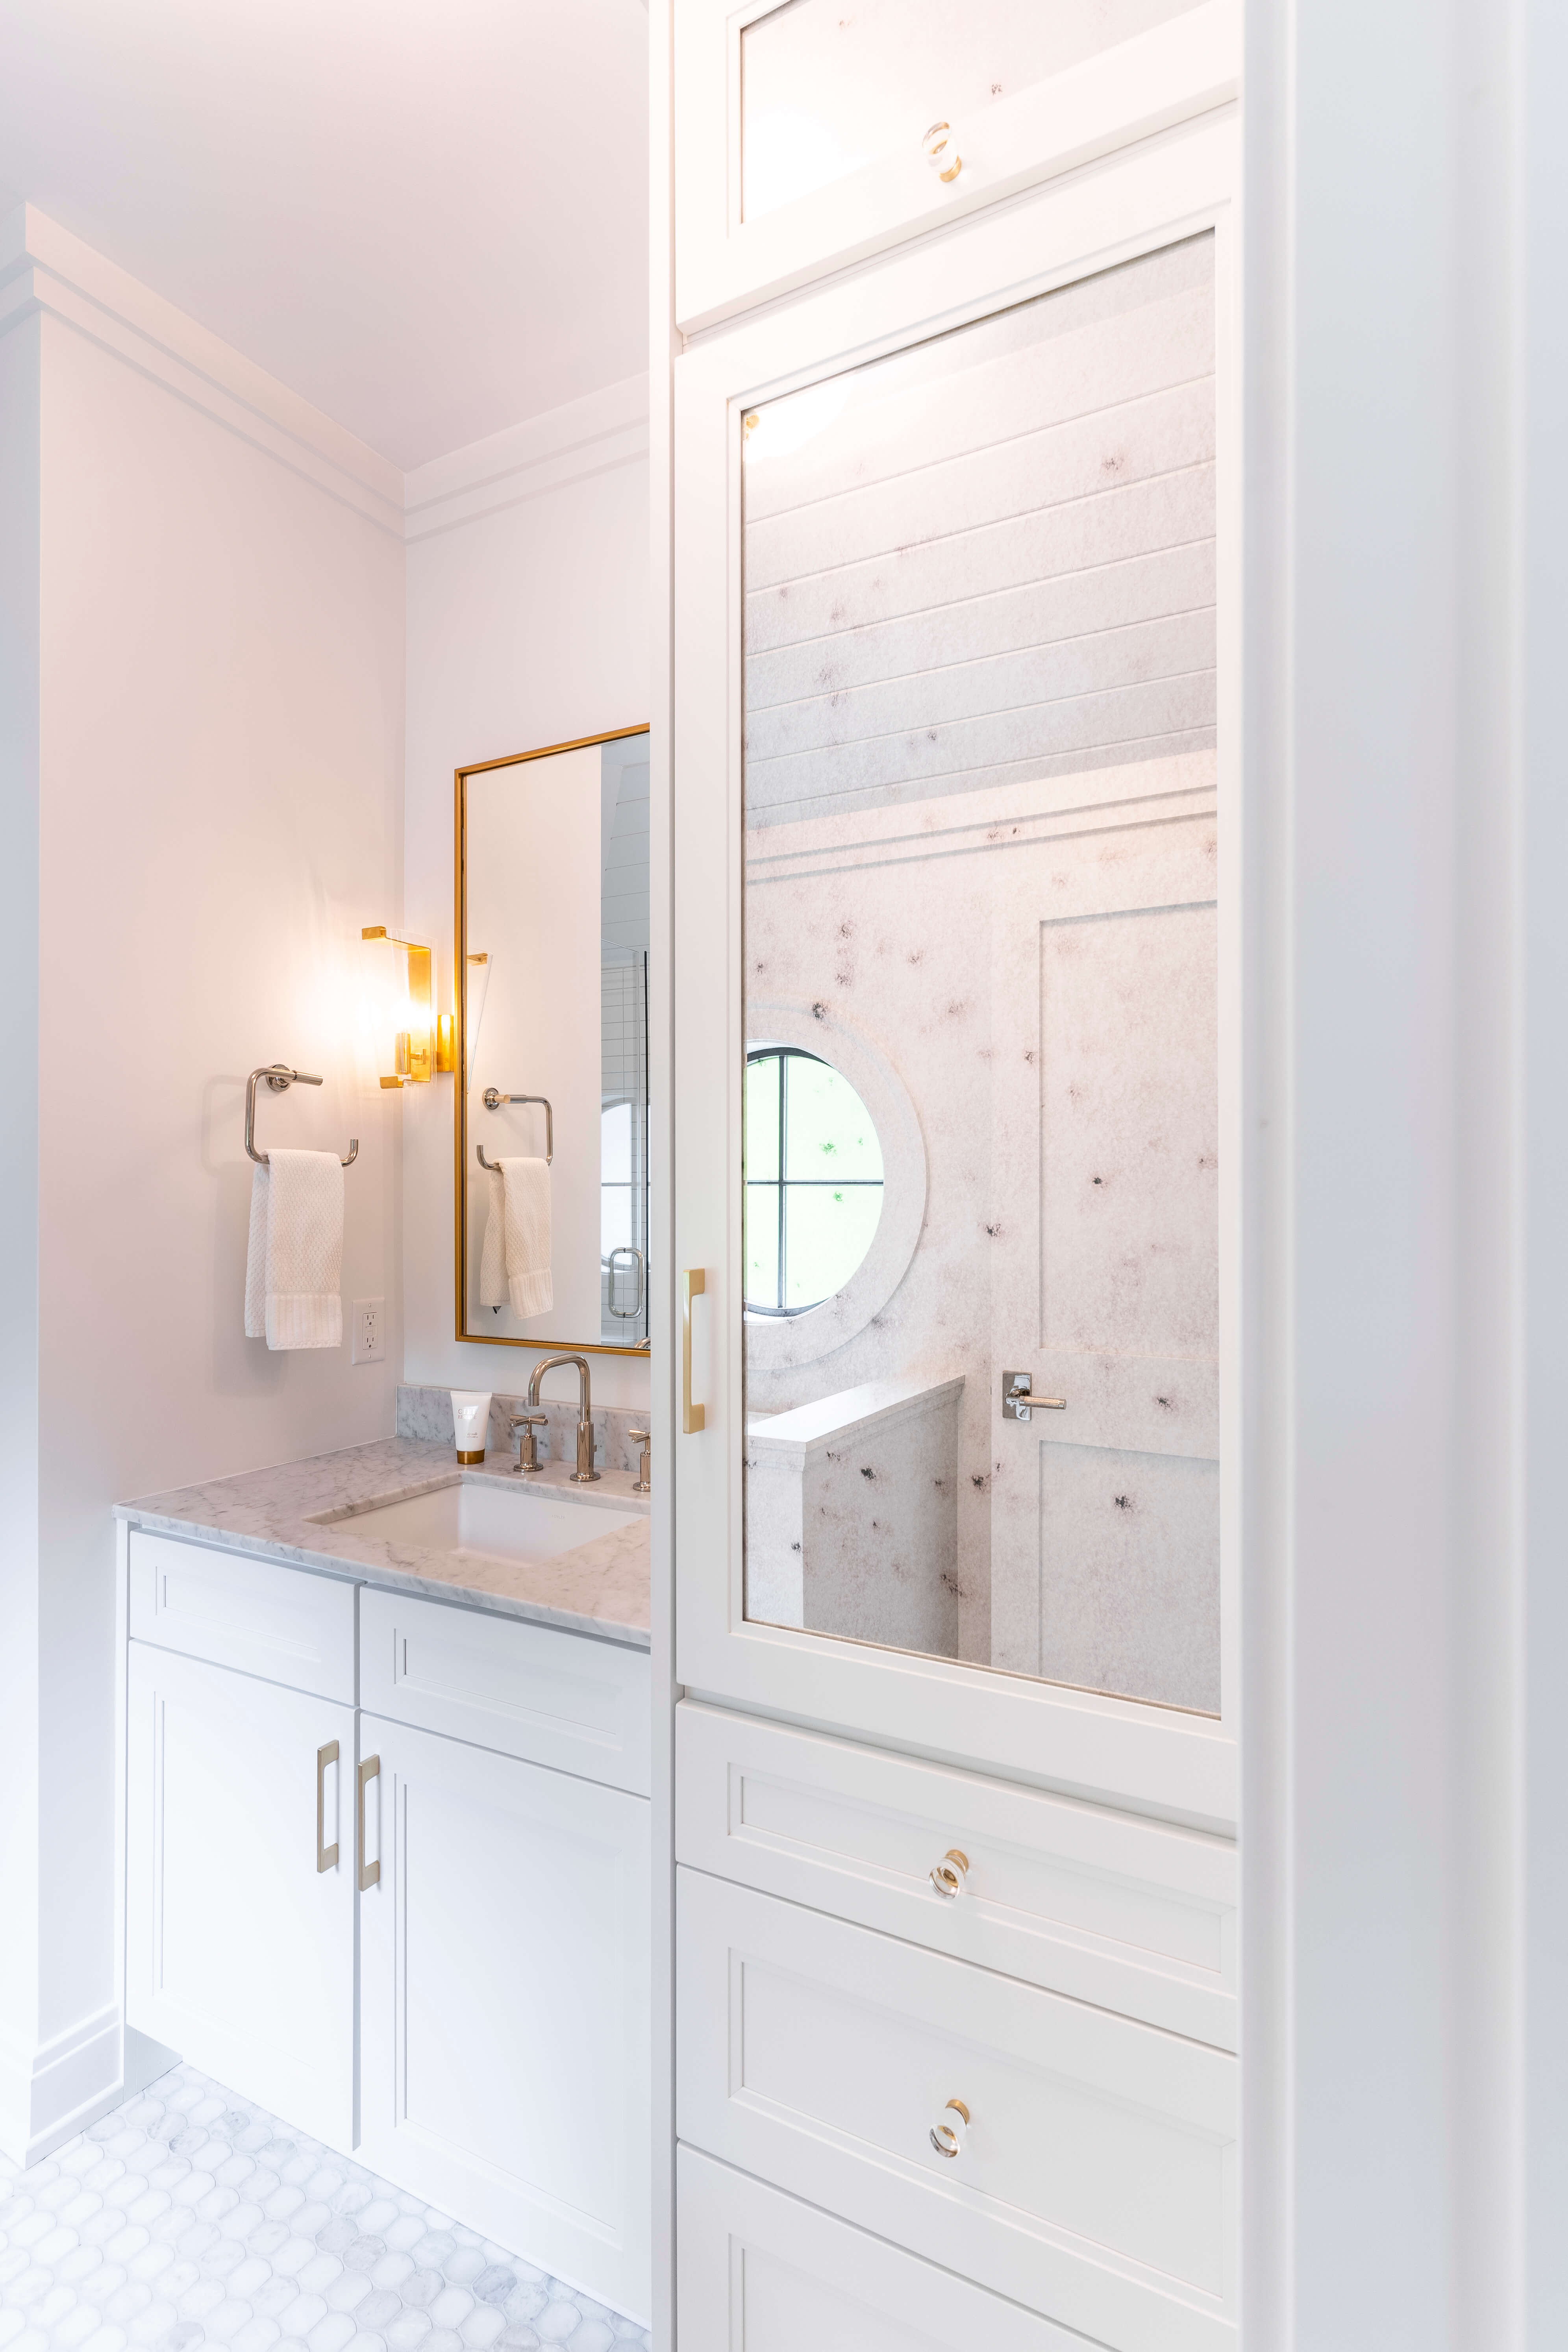 A bright all white bathroom design with a mirror insert in a tall linen cabinet to help the small room feel more spacious.